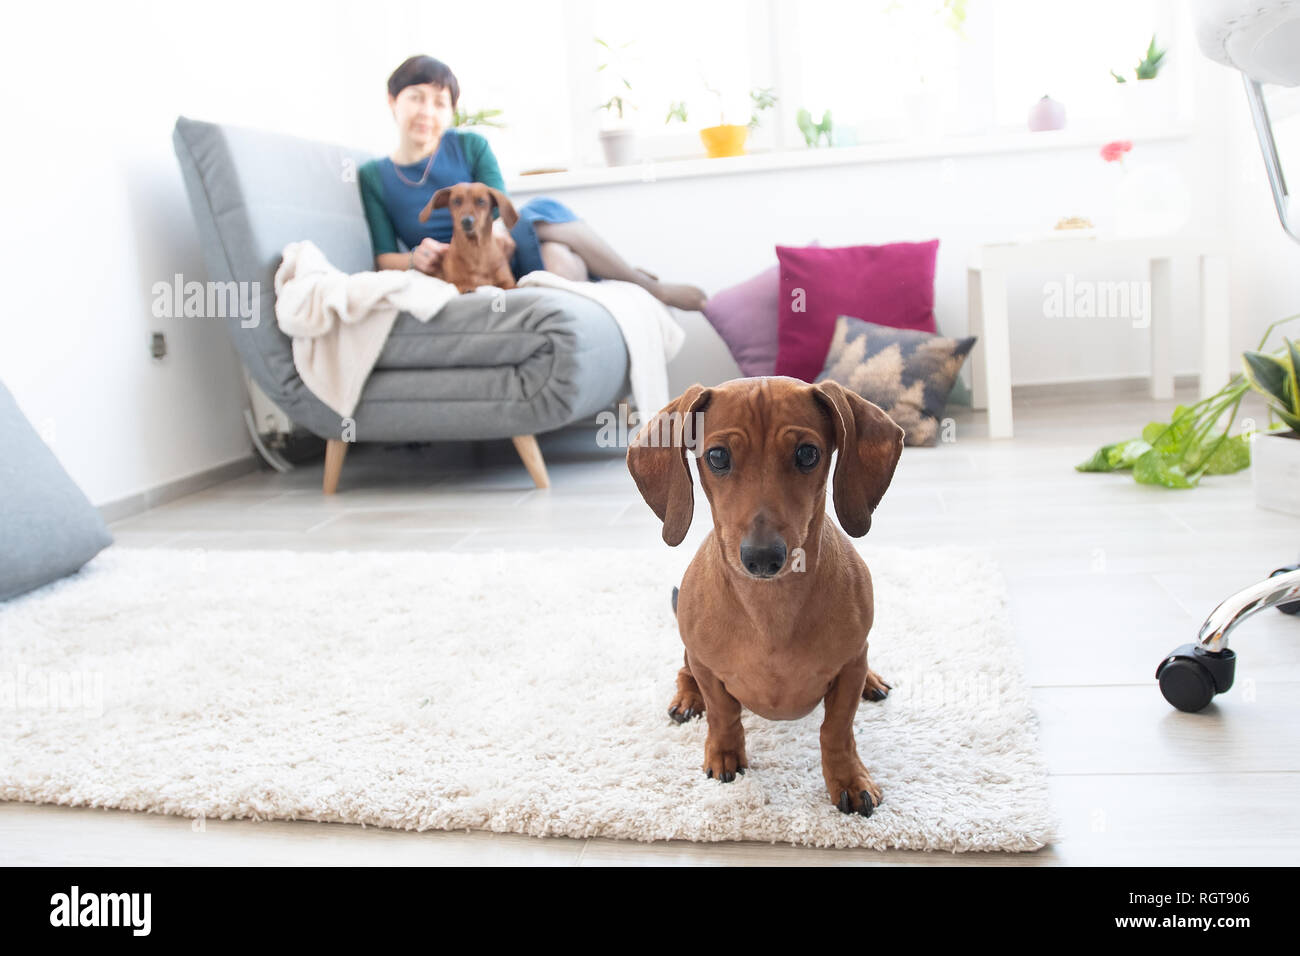 Cute dachshund in room with woman and other dog on background Stock Photo